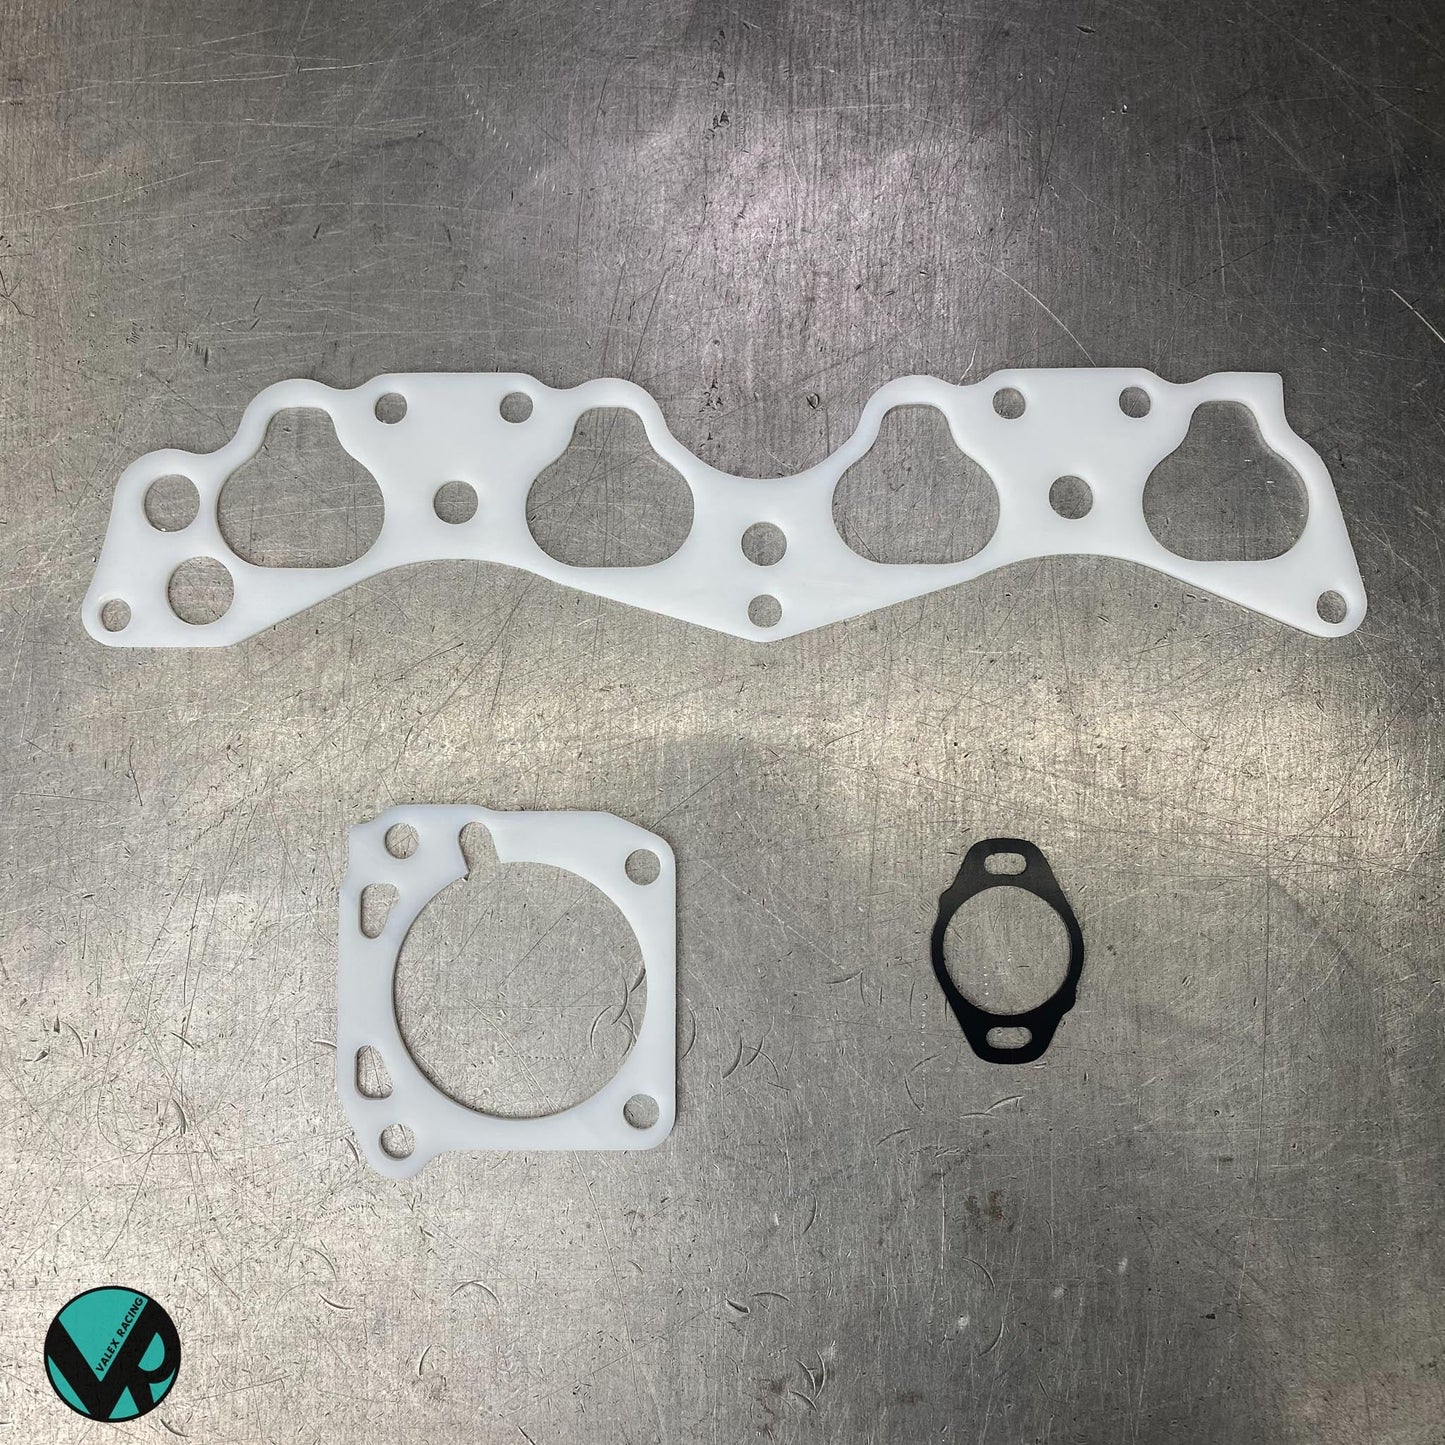 Honda Acura Reusable Thermal Intake Manifold Gasket, Thermal Throttle Body Gasket, and Thermal TPS Gasket D15 D16